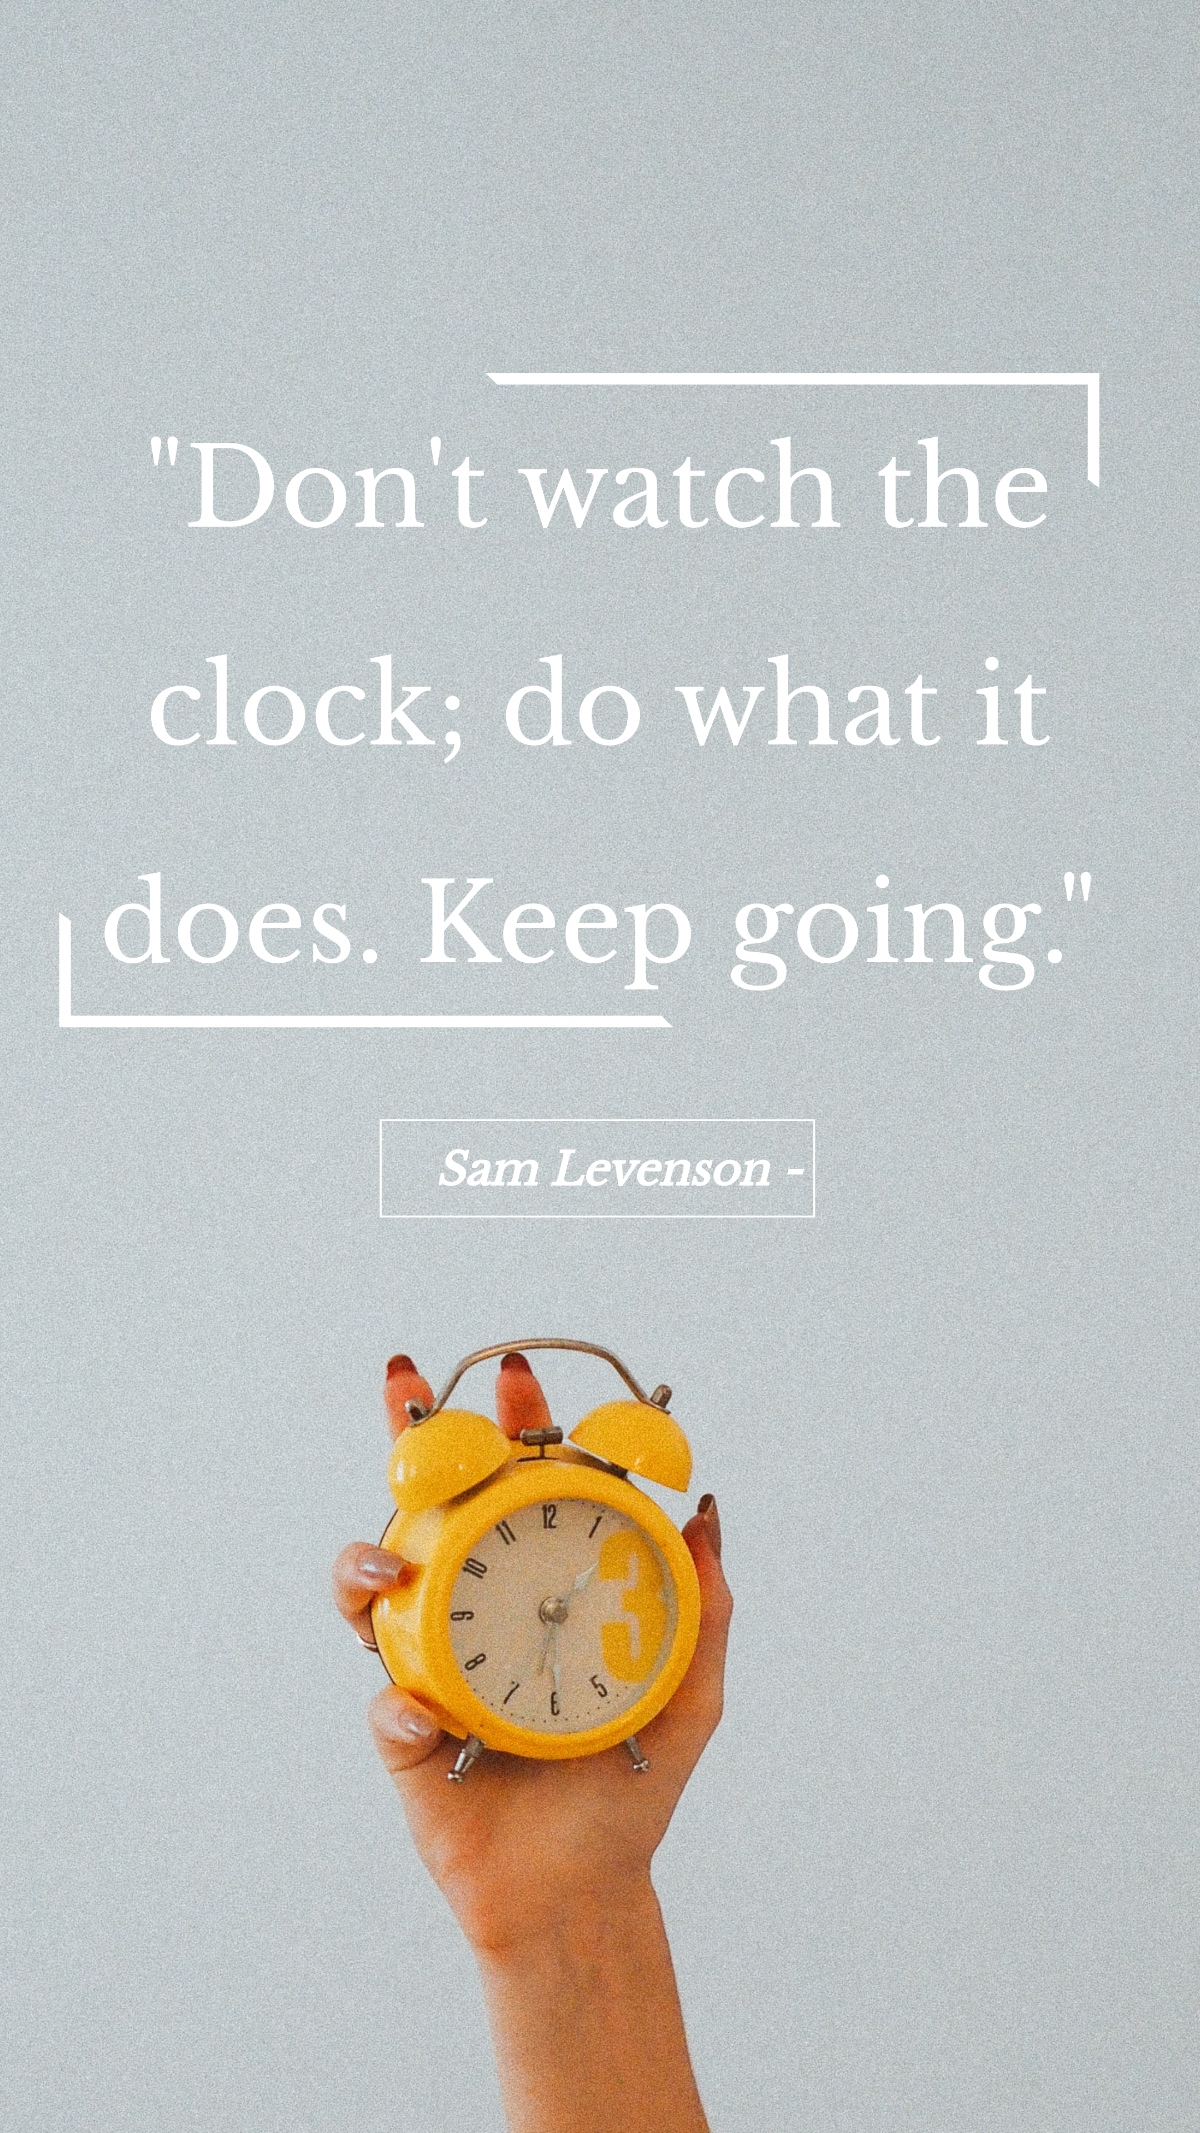 Sam Levenson - Don't watch the clock; do what it does. Keep going. Template